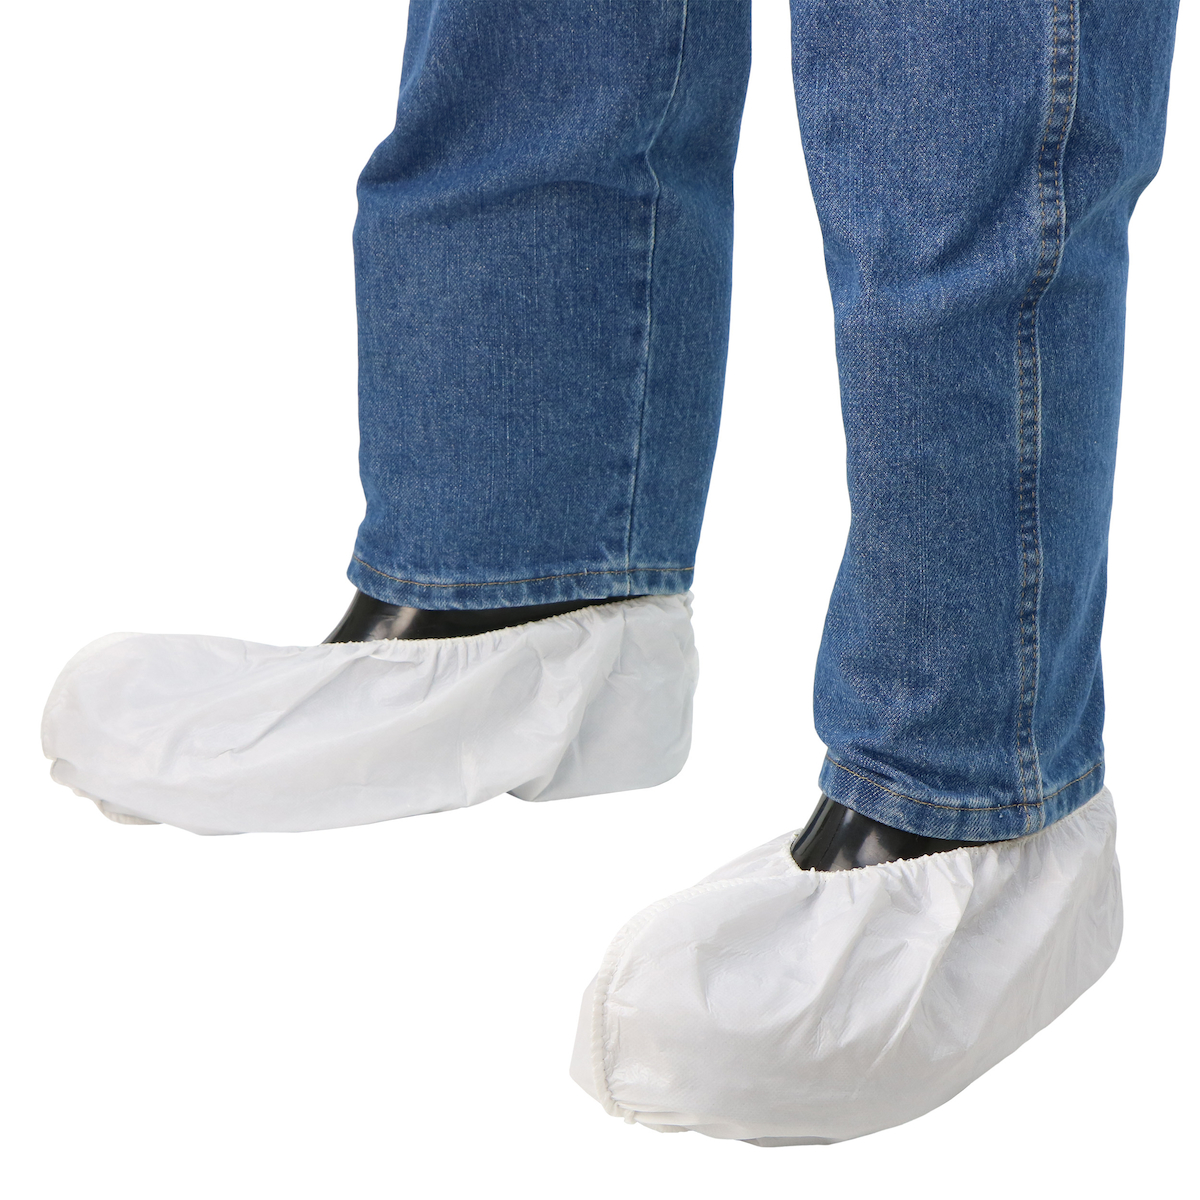 Posi-Wear® UB™ Shoe Covers - Spill Control